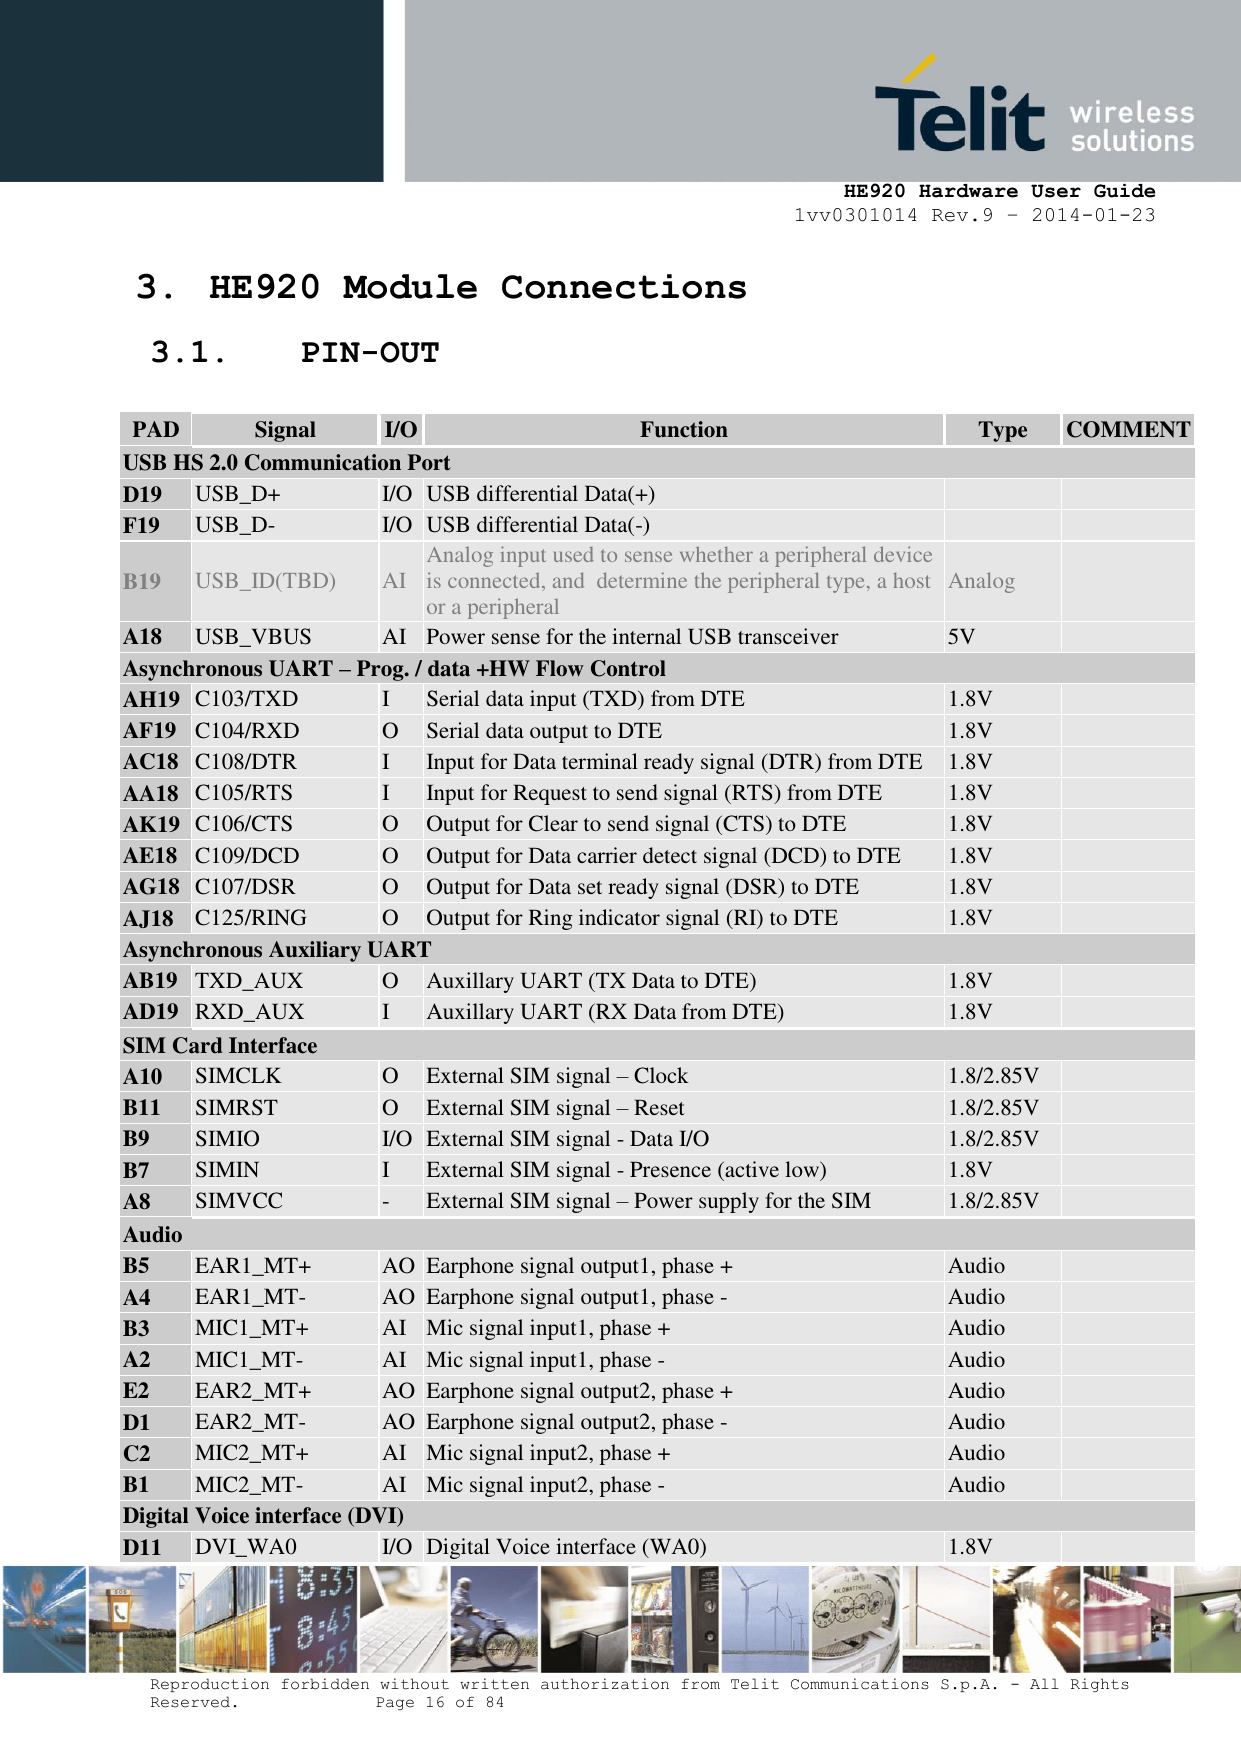     HE920 Hardware User Guide 1vv0301014 Rev.9 – 2014-01-23 Reproduction forbidden without written authorization from Telit Communications S.p.A. - All Rights Reserved.    Page 16 of 84  3. HE920 Module Connections 3.1. PIN-OUT  PAD Signal I/O Function Type COMMENT USB HS 2.0 Communication Port D19 USB_D+ I/O USB differential Data(+)   F19 USB_D- I/O USB differential Data(-)   B19 USB_ID(TBD) AI Analog input used to sense whether a peripheral device is connected, and  determine the peripheral type, a host  or a peripheral Analog  A18 USB_VBUS AI Power sense for the internal USB transceiver 5V  Asynchronous UART – Prog. / data +HW Flow Control AH19 C103/TXD I Serial data input (TXD) from DTE 1.8V  AF19 C104/RXD O Serial data output to DTE 1.8V  AC18 C108/DTR I Input for Data terminal ready signal (DTR) from DTE 1.8V  AA18 C105/RTS I Input for Request to send signal (RTS) from DTE 1.8V  AK19 C106/CTS O Output for Clear to send signal (CTS) to DTE 1.8V  AE18 C109/DCD O Output for Data carrier detect signal (DCD) to DTE 1.8V  AG18 C107/DSR O Output for Data set ready signal (DSR) to DTE 1.8V  AJ18 C125/RING O Output for Ring indicator signal (RI) to DTE 1.8V  Asynchronous Auxiliary UART AB19 TXD_AUX O Auxillary UART (TX Data to DTE) 1.8V  AD19 RXD_AUX I Auxillary UART (RX Data from DTE) 1.8V  SIM Card Interface A10 SIMCLK O External SIM signal – Clock 1.8/2.85V  B11 SIMRST O External SIM signal – Reset 1.8/2.85V  B9 SIMIO I/O External SIM signal - Data I/O 1.8/2.85V  B7 SIMIN I External SIM signal - Presence (active low) 1.8V  A8 SIMVCC - External SIM signal – Power supply for the SIM 1.8/2.85V  Audio B5 EAR1_MT+ AO Earphone signal output1, phase + Audio  A4 EAR1_MT- AO Earphone signal output1, phase - Audio  B3 MIC1_MT+ AI Mic signal input1, phase + Audio  A2 MIC1_MT- AI Mic signal input1, phase - Audio  E2 EAR2_MT+ AO Earphone signal output2, phase + Audio  D1 EAR2_MT- AO Earphone signal output2, phase - Audio  C2 MIC2_MT+ AI Mic signal input2, phase + Audio  B1 MIC2_MT- AI Mic signal input2, phase - Audio  Digital Voice interface (DVI) D11 DVI_WA0 I/O Digital Voice interface (WA0) 1.8V  